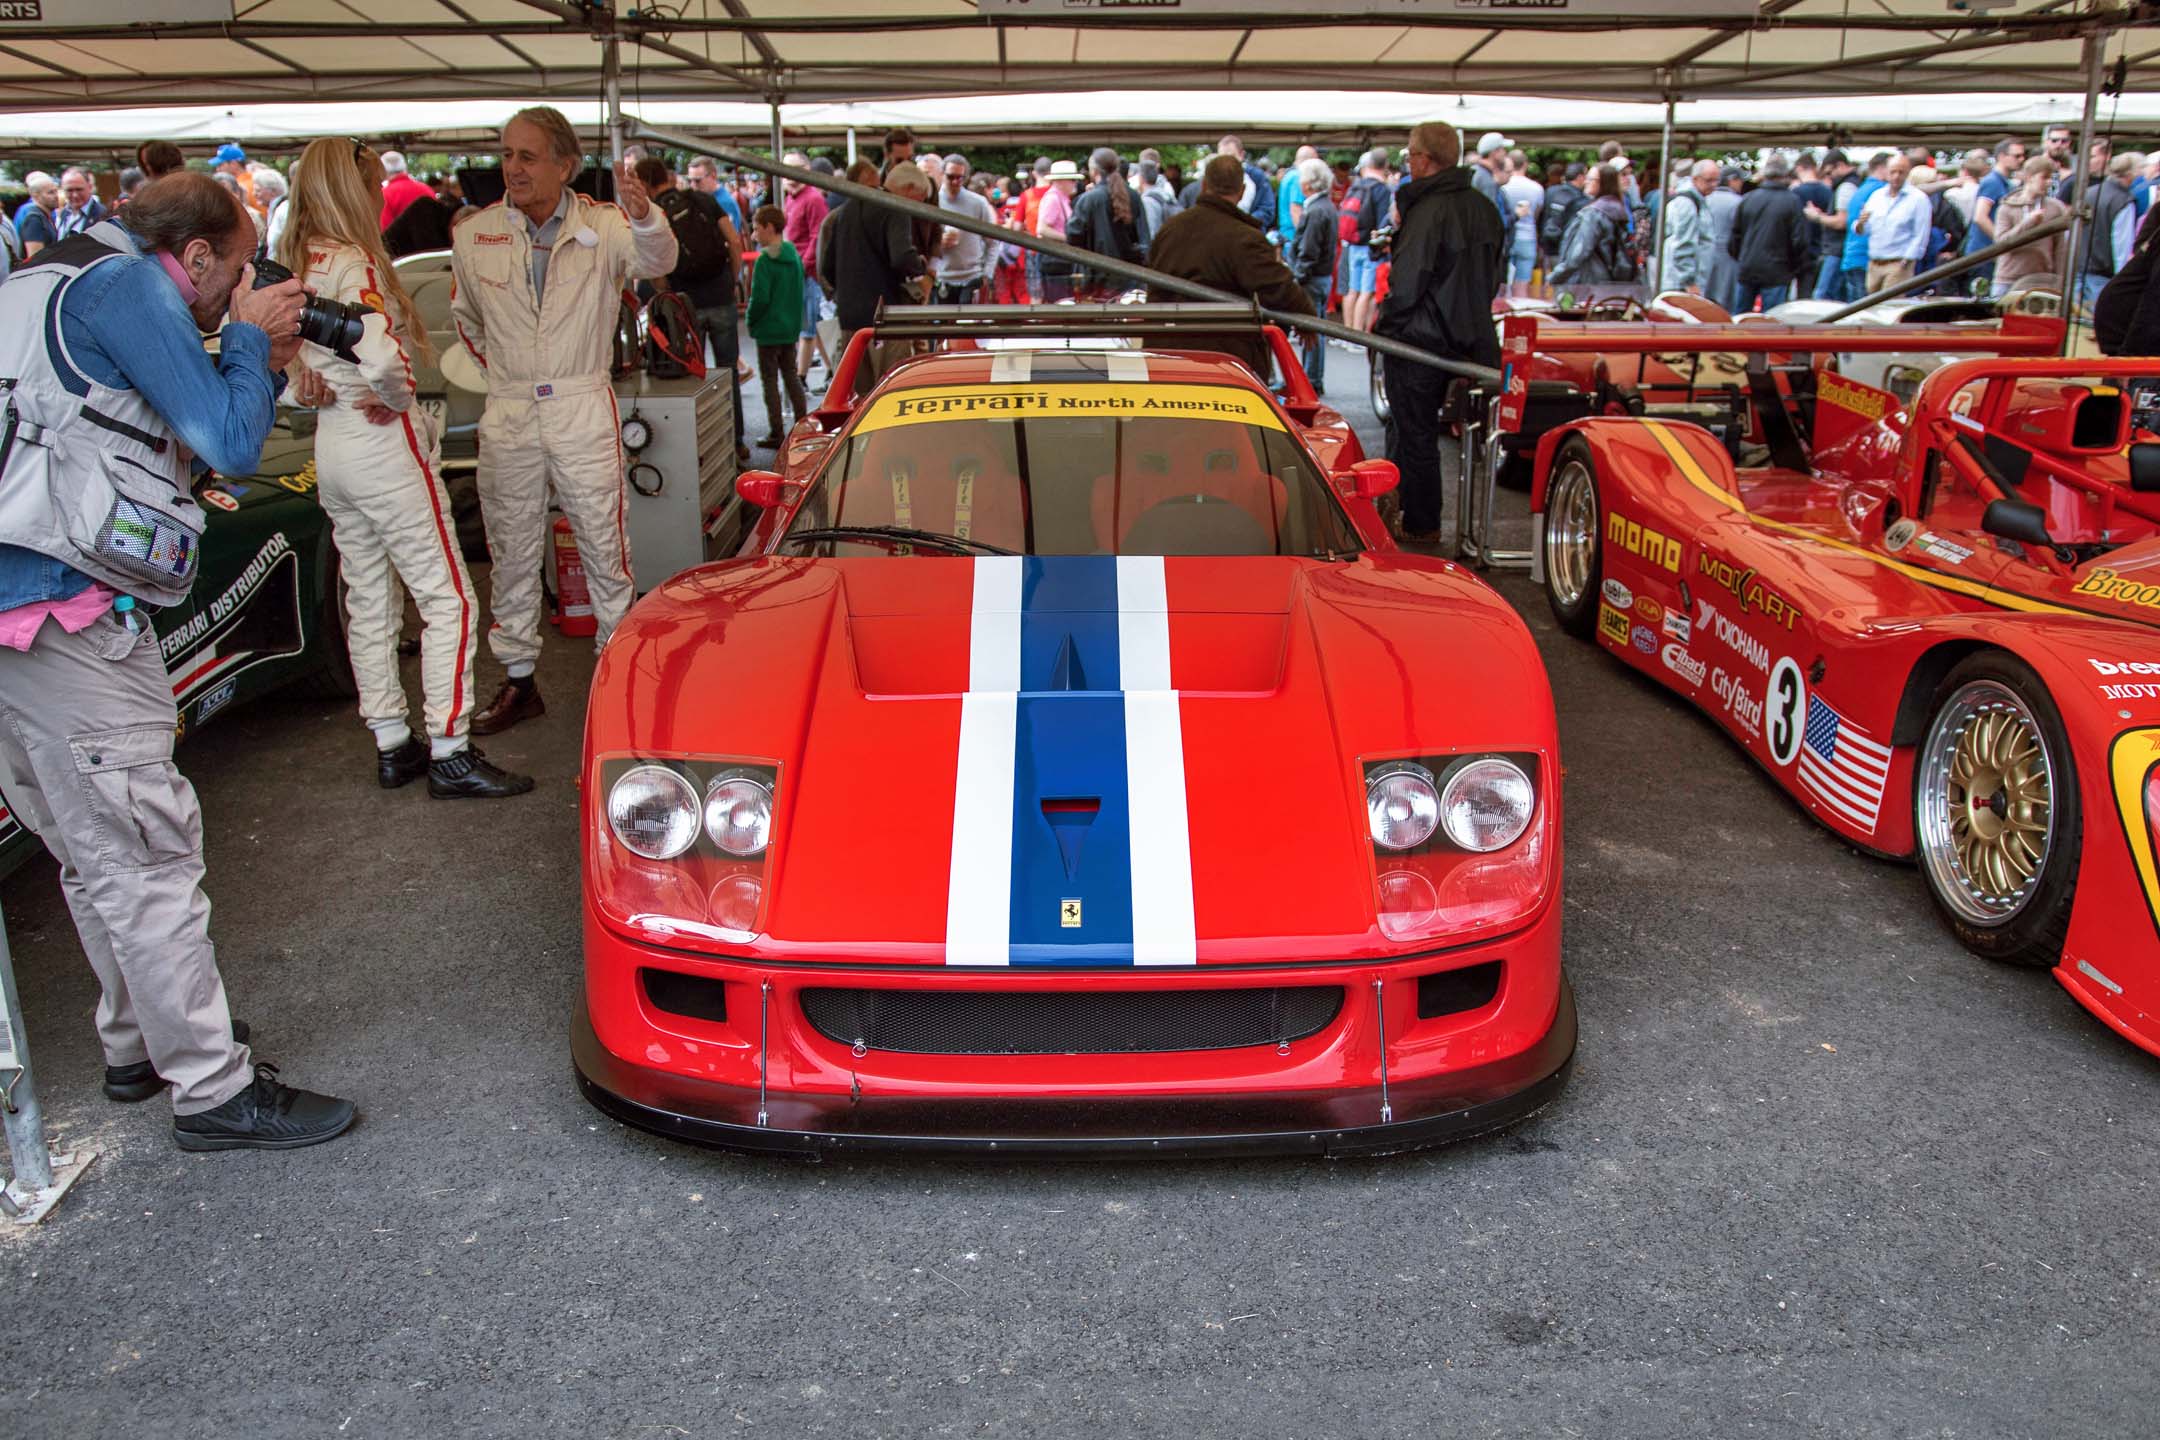 An F40 LM. The very limited racing version of the F40 supercar, which turns thirty this year, the LM is even lighter and crazier than the original. The owner also fielded a Ferrari 308 Group B rally car, just for fun.